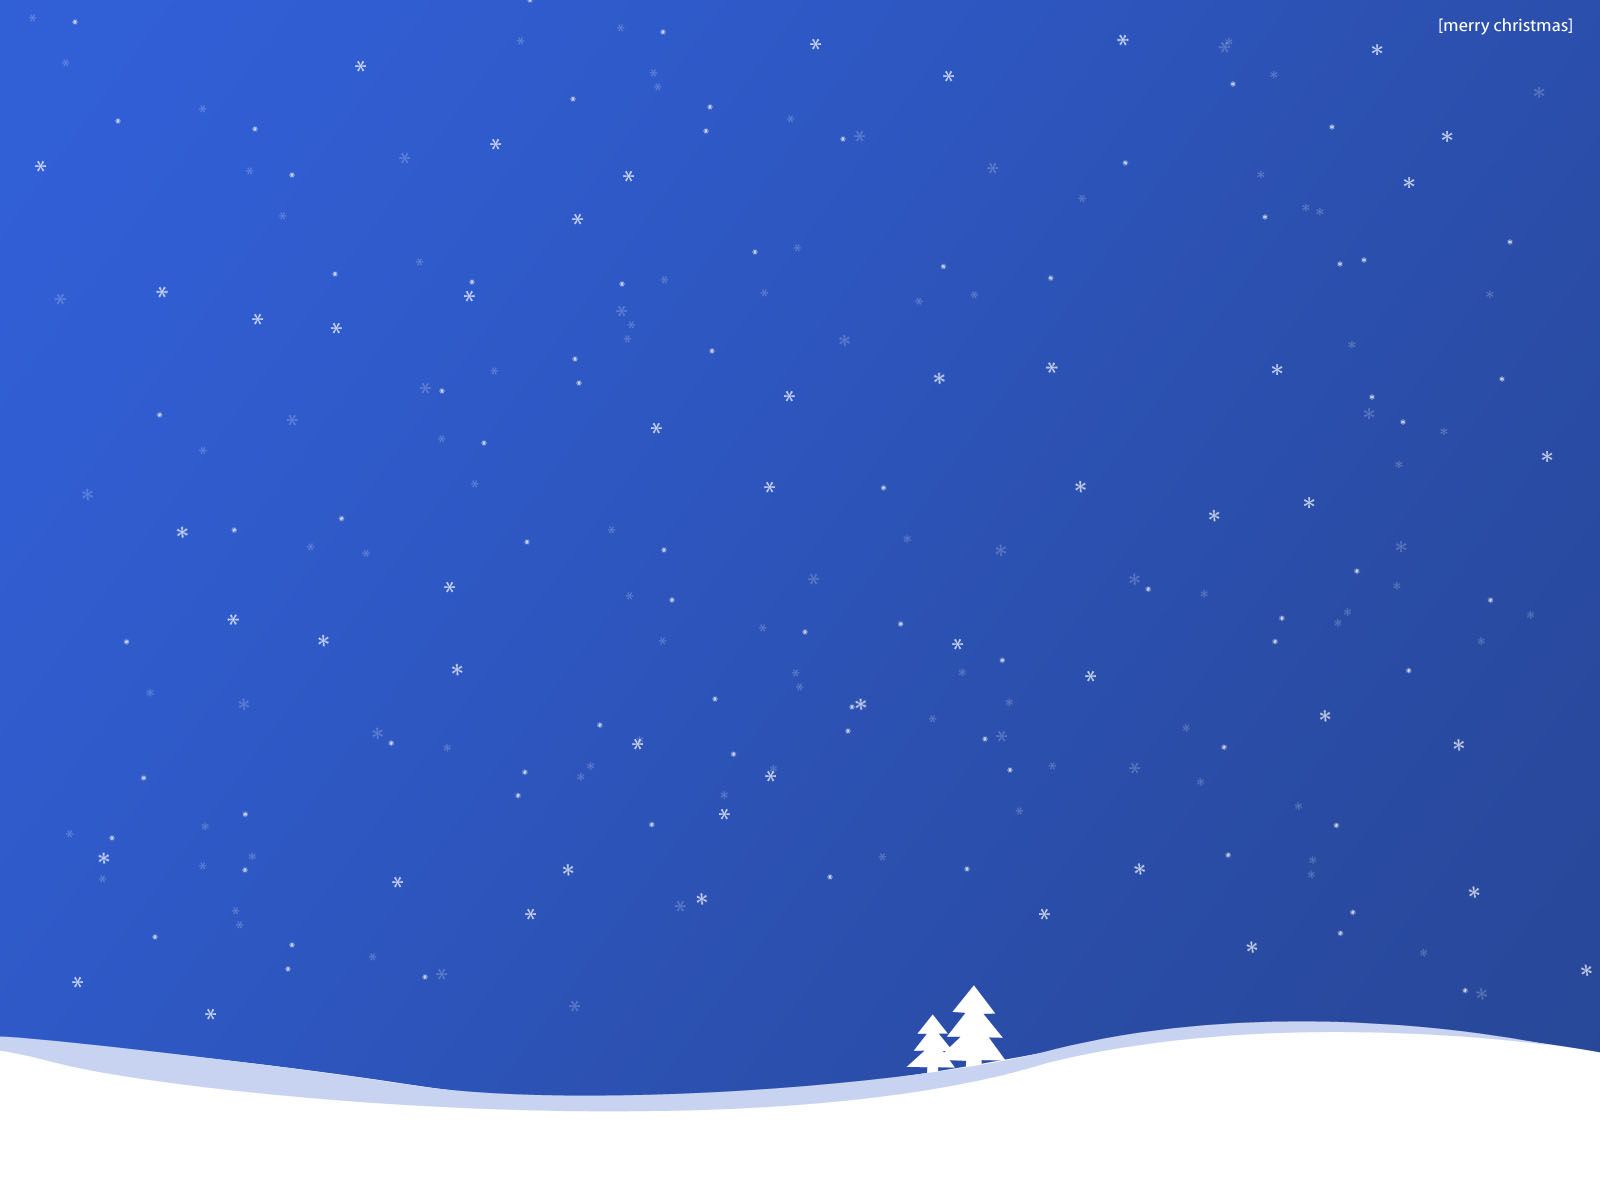 40 Free Christmas Wallpapers HD Quality 2012 Collection